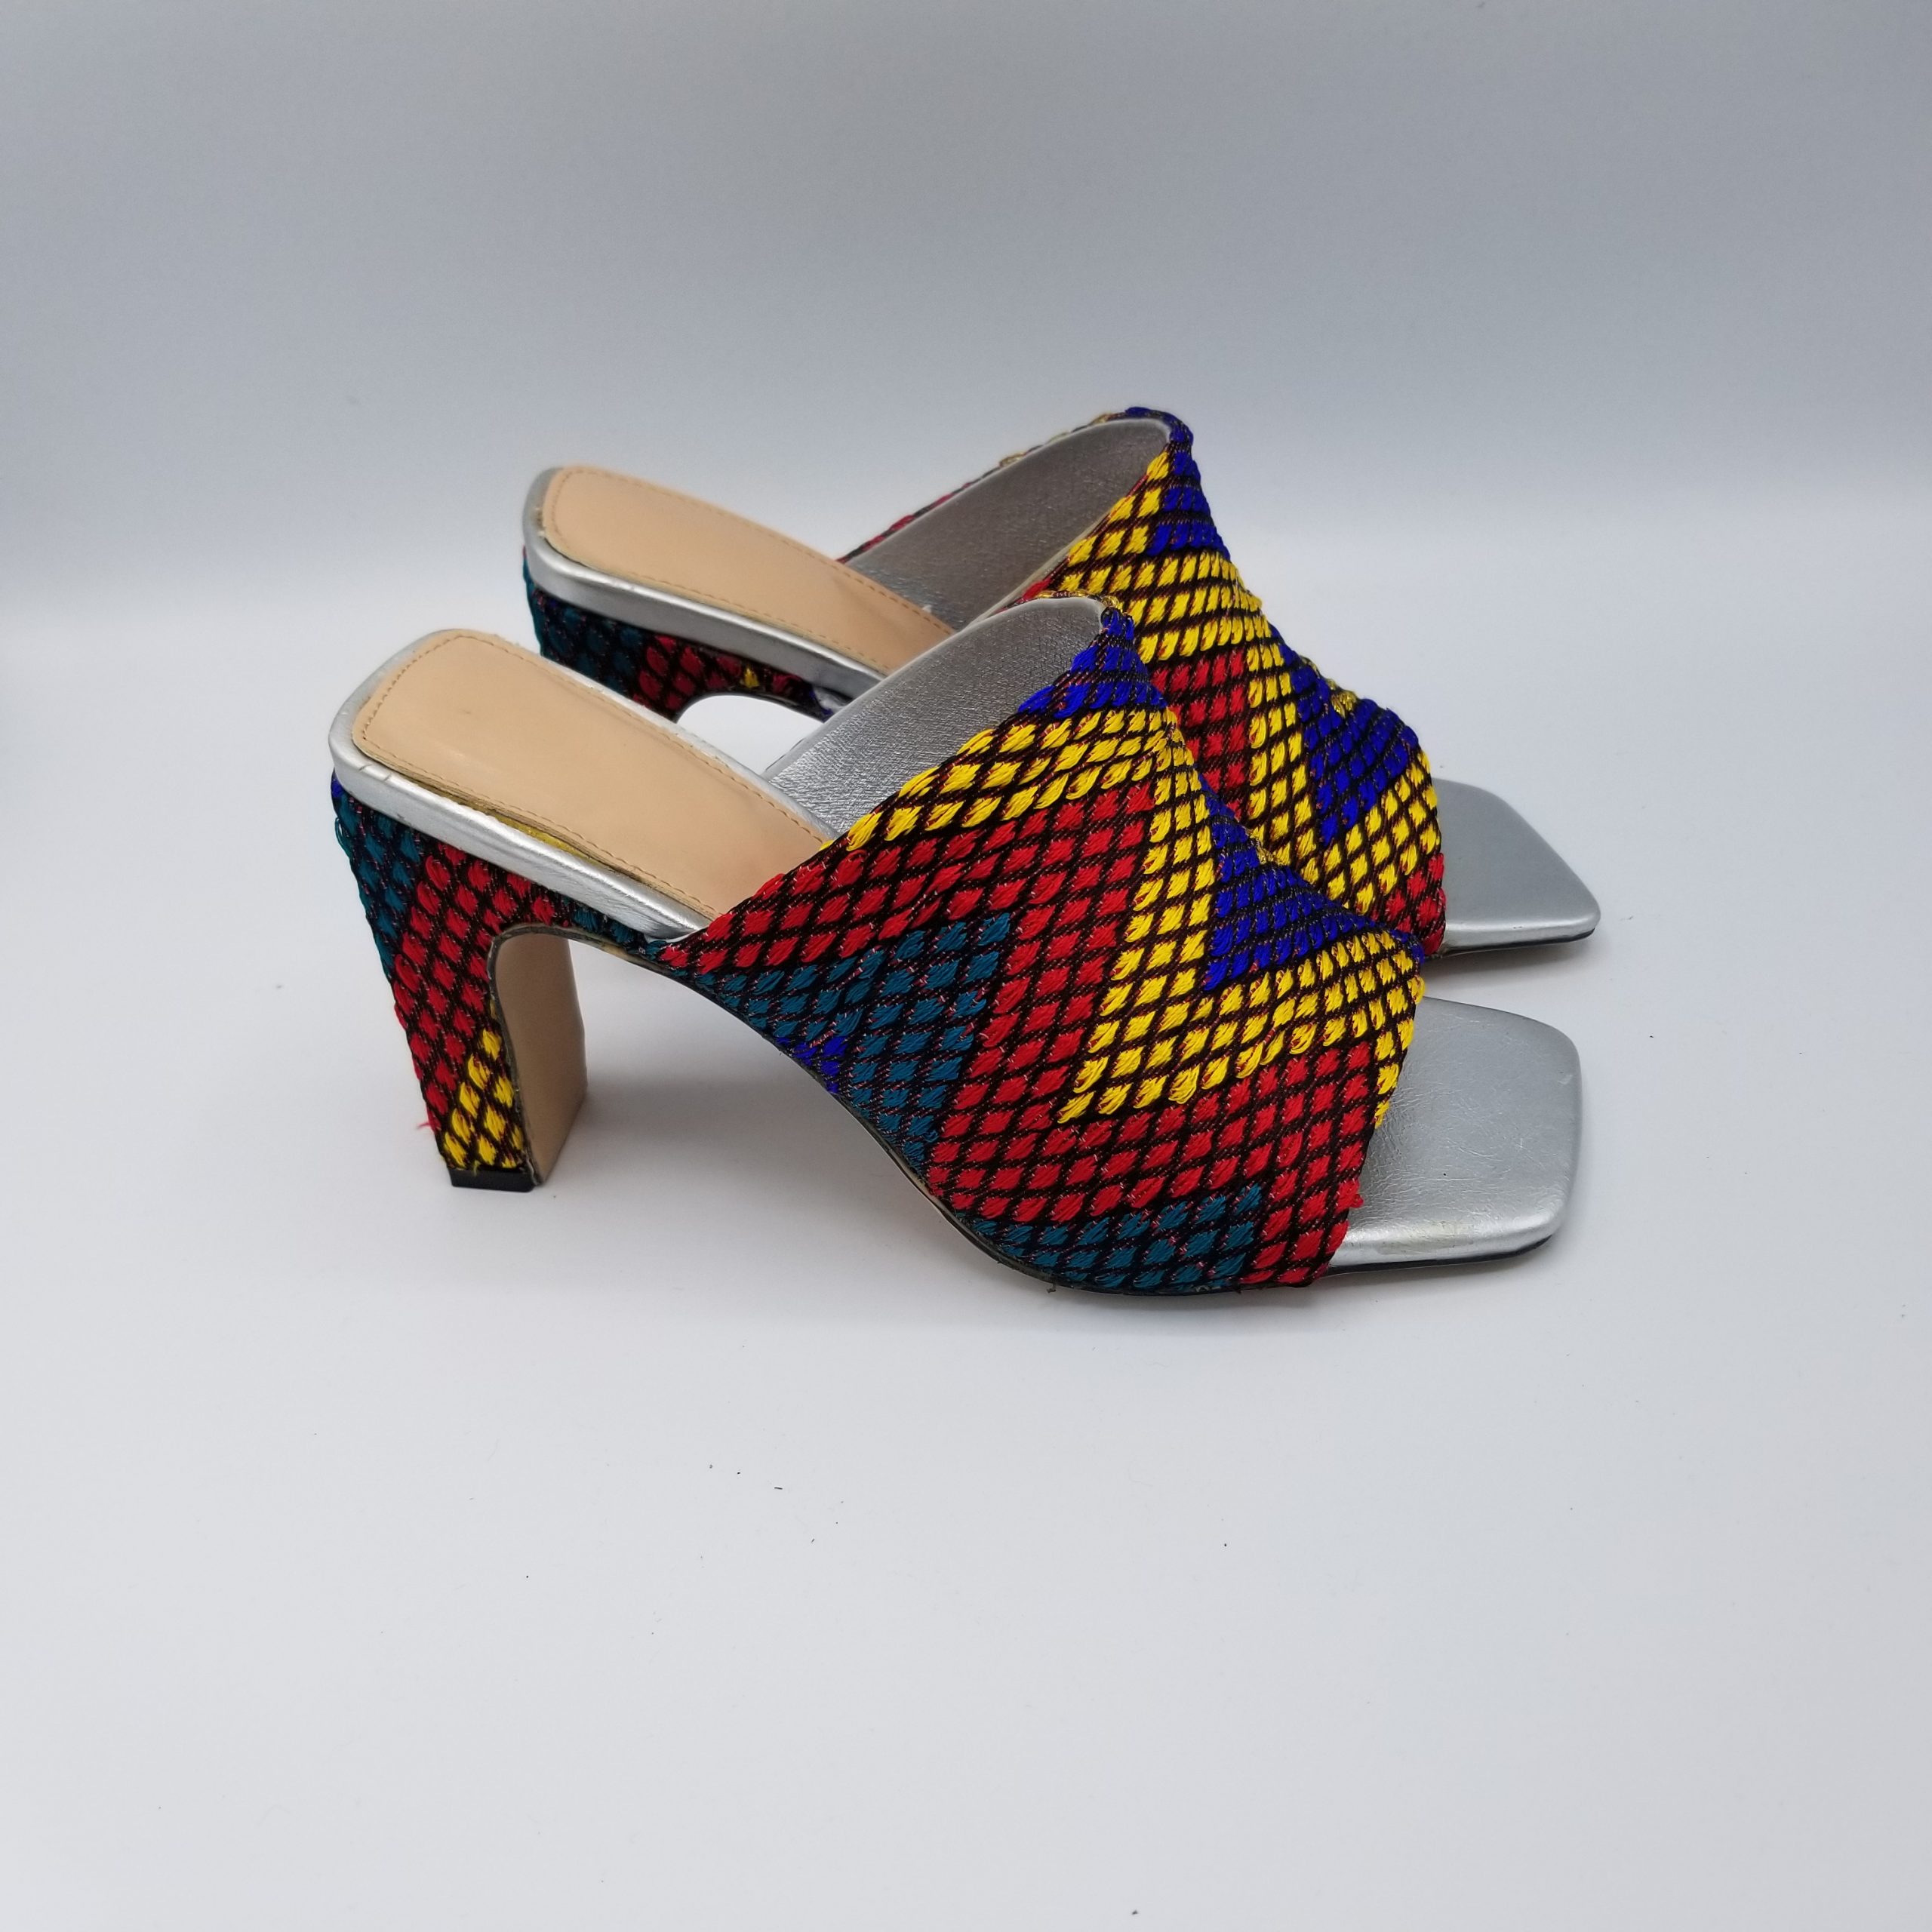 A pair of colorful heels